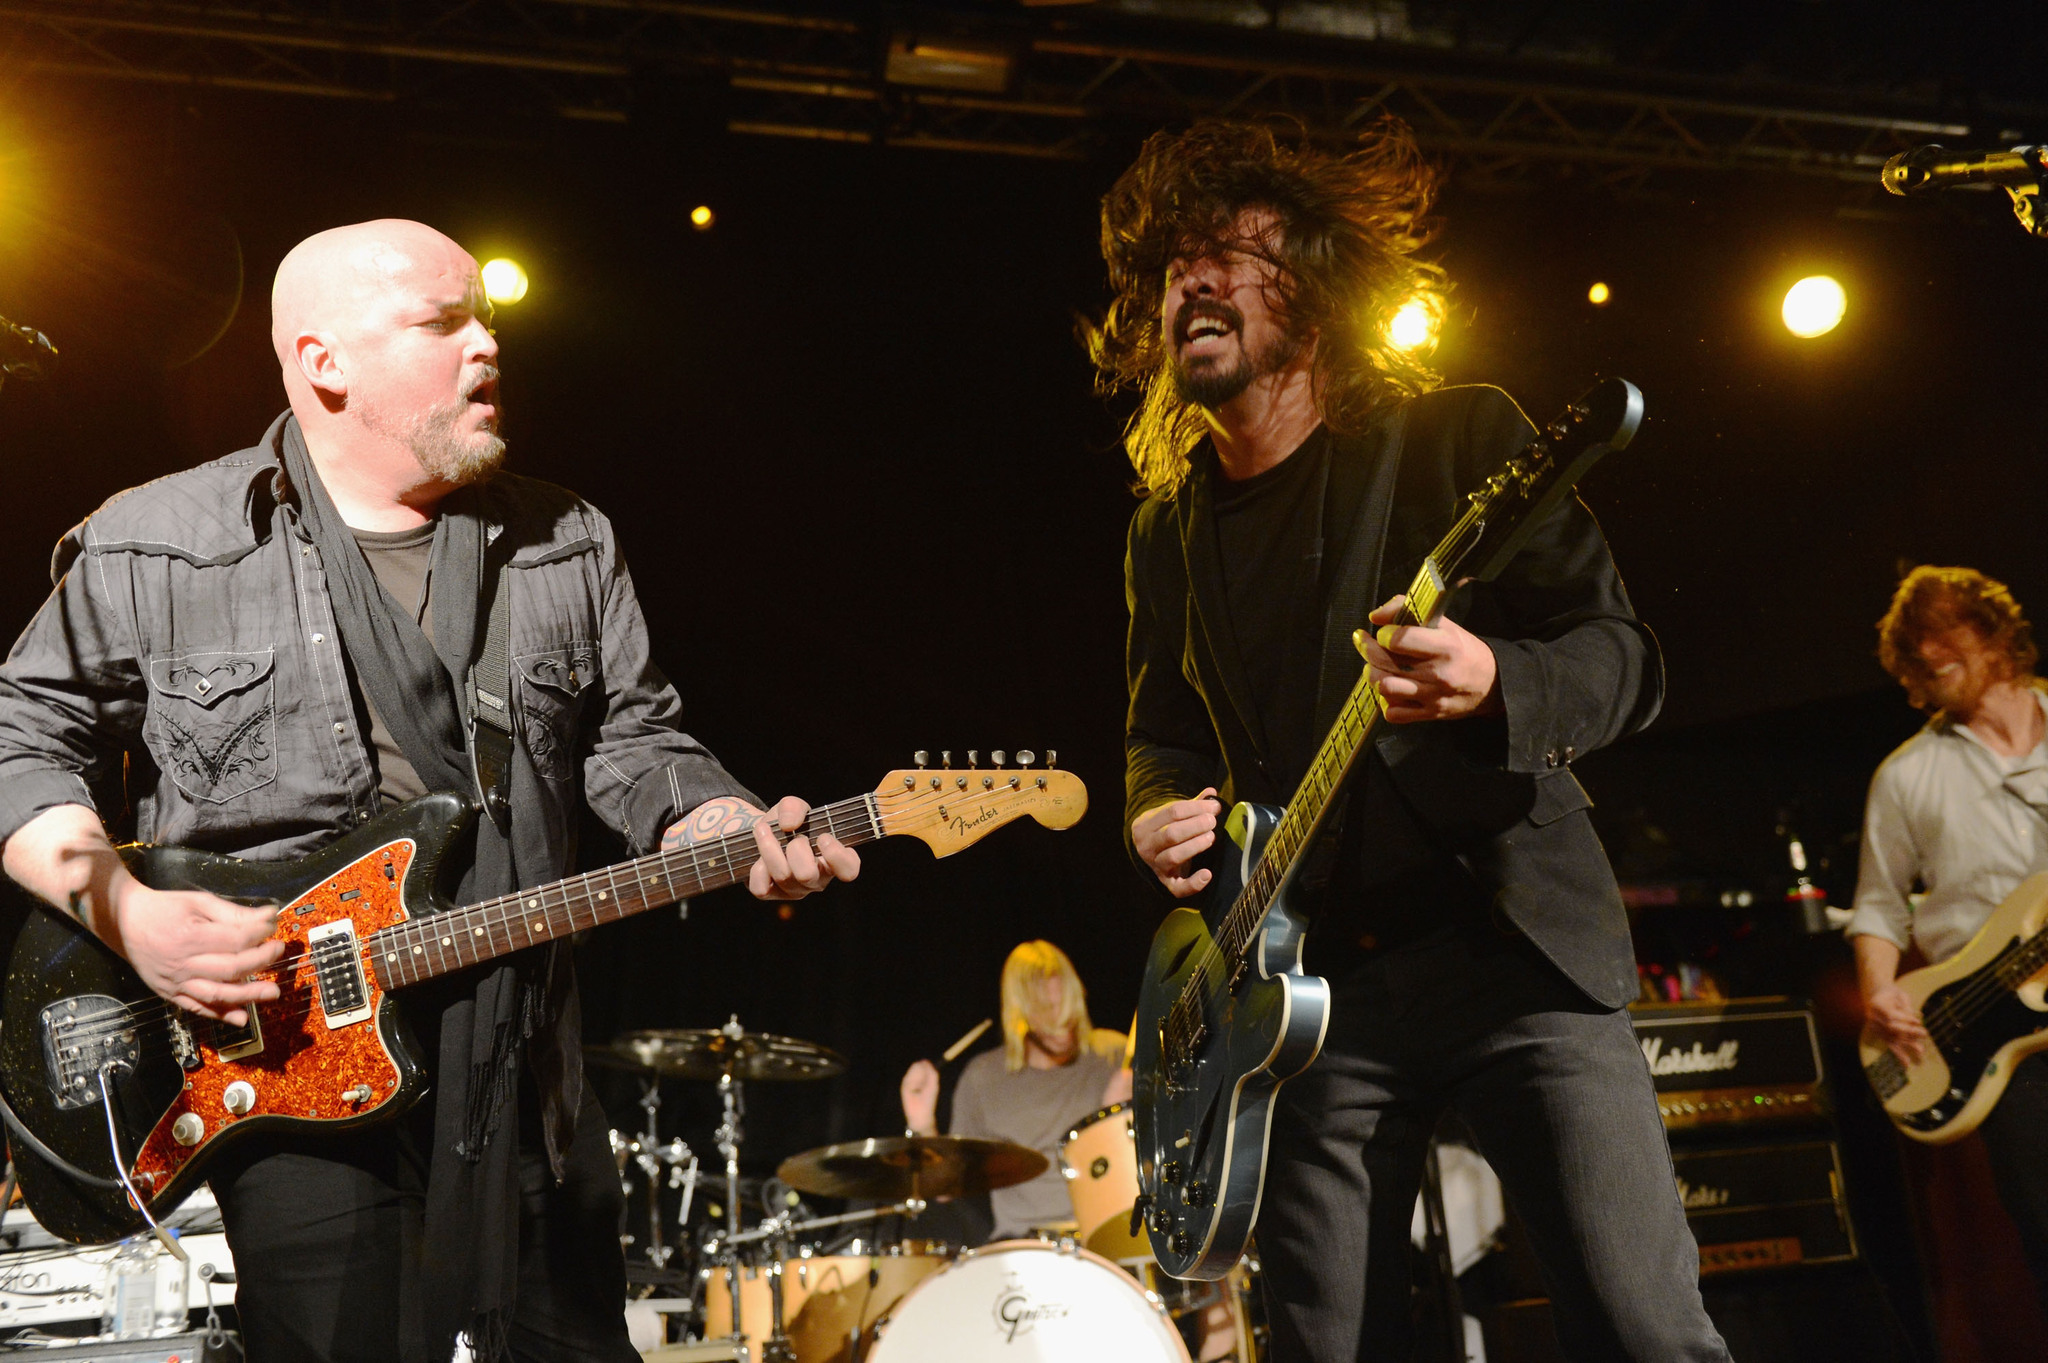 Dave Grohl and Alain Johannes